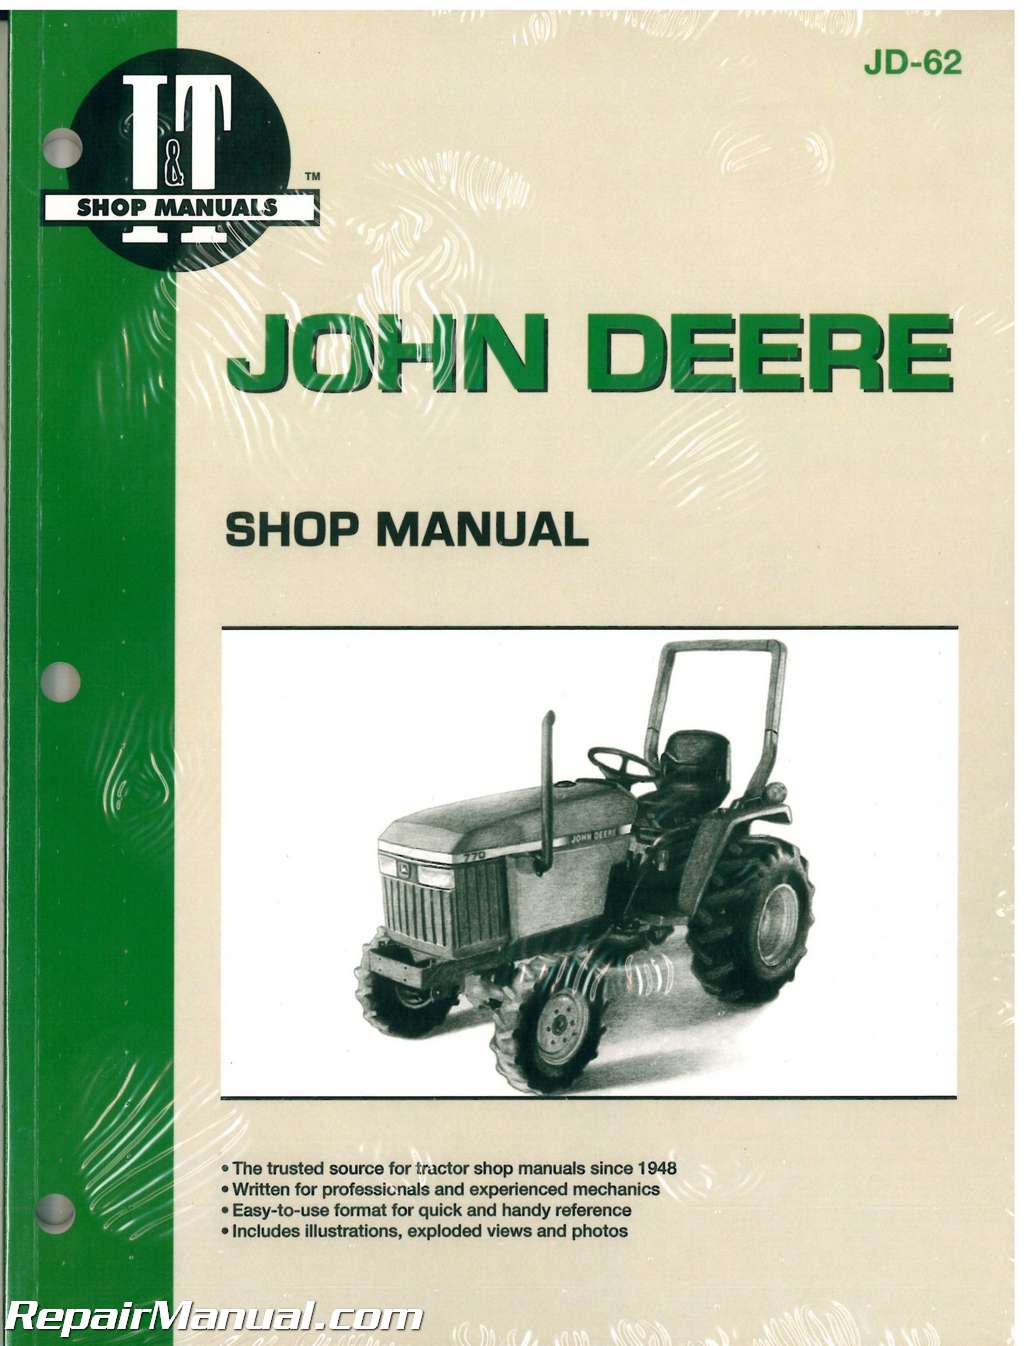 John Deere 670 And 770 Tractor Parts Manual – The Best Manuals Online